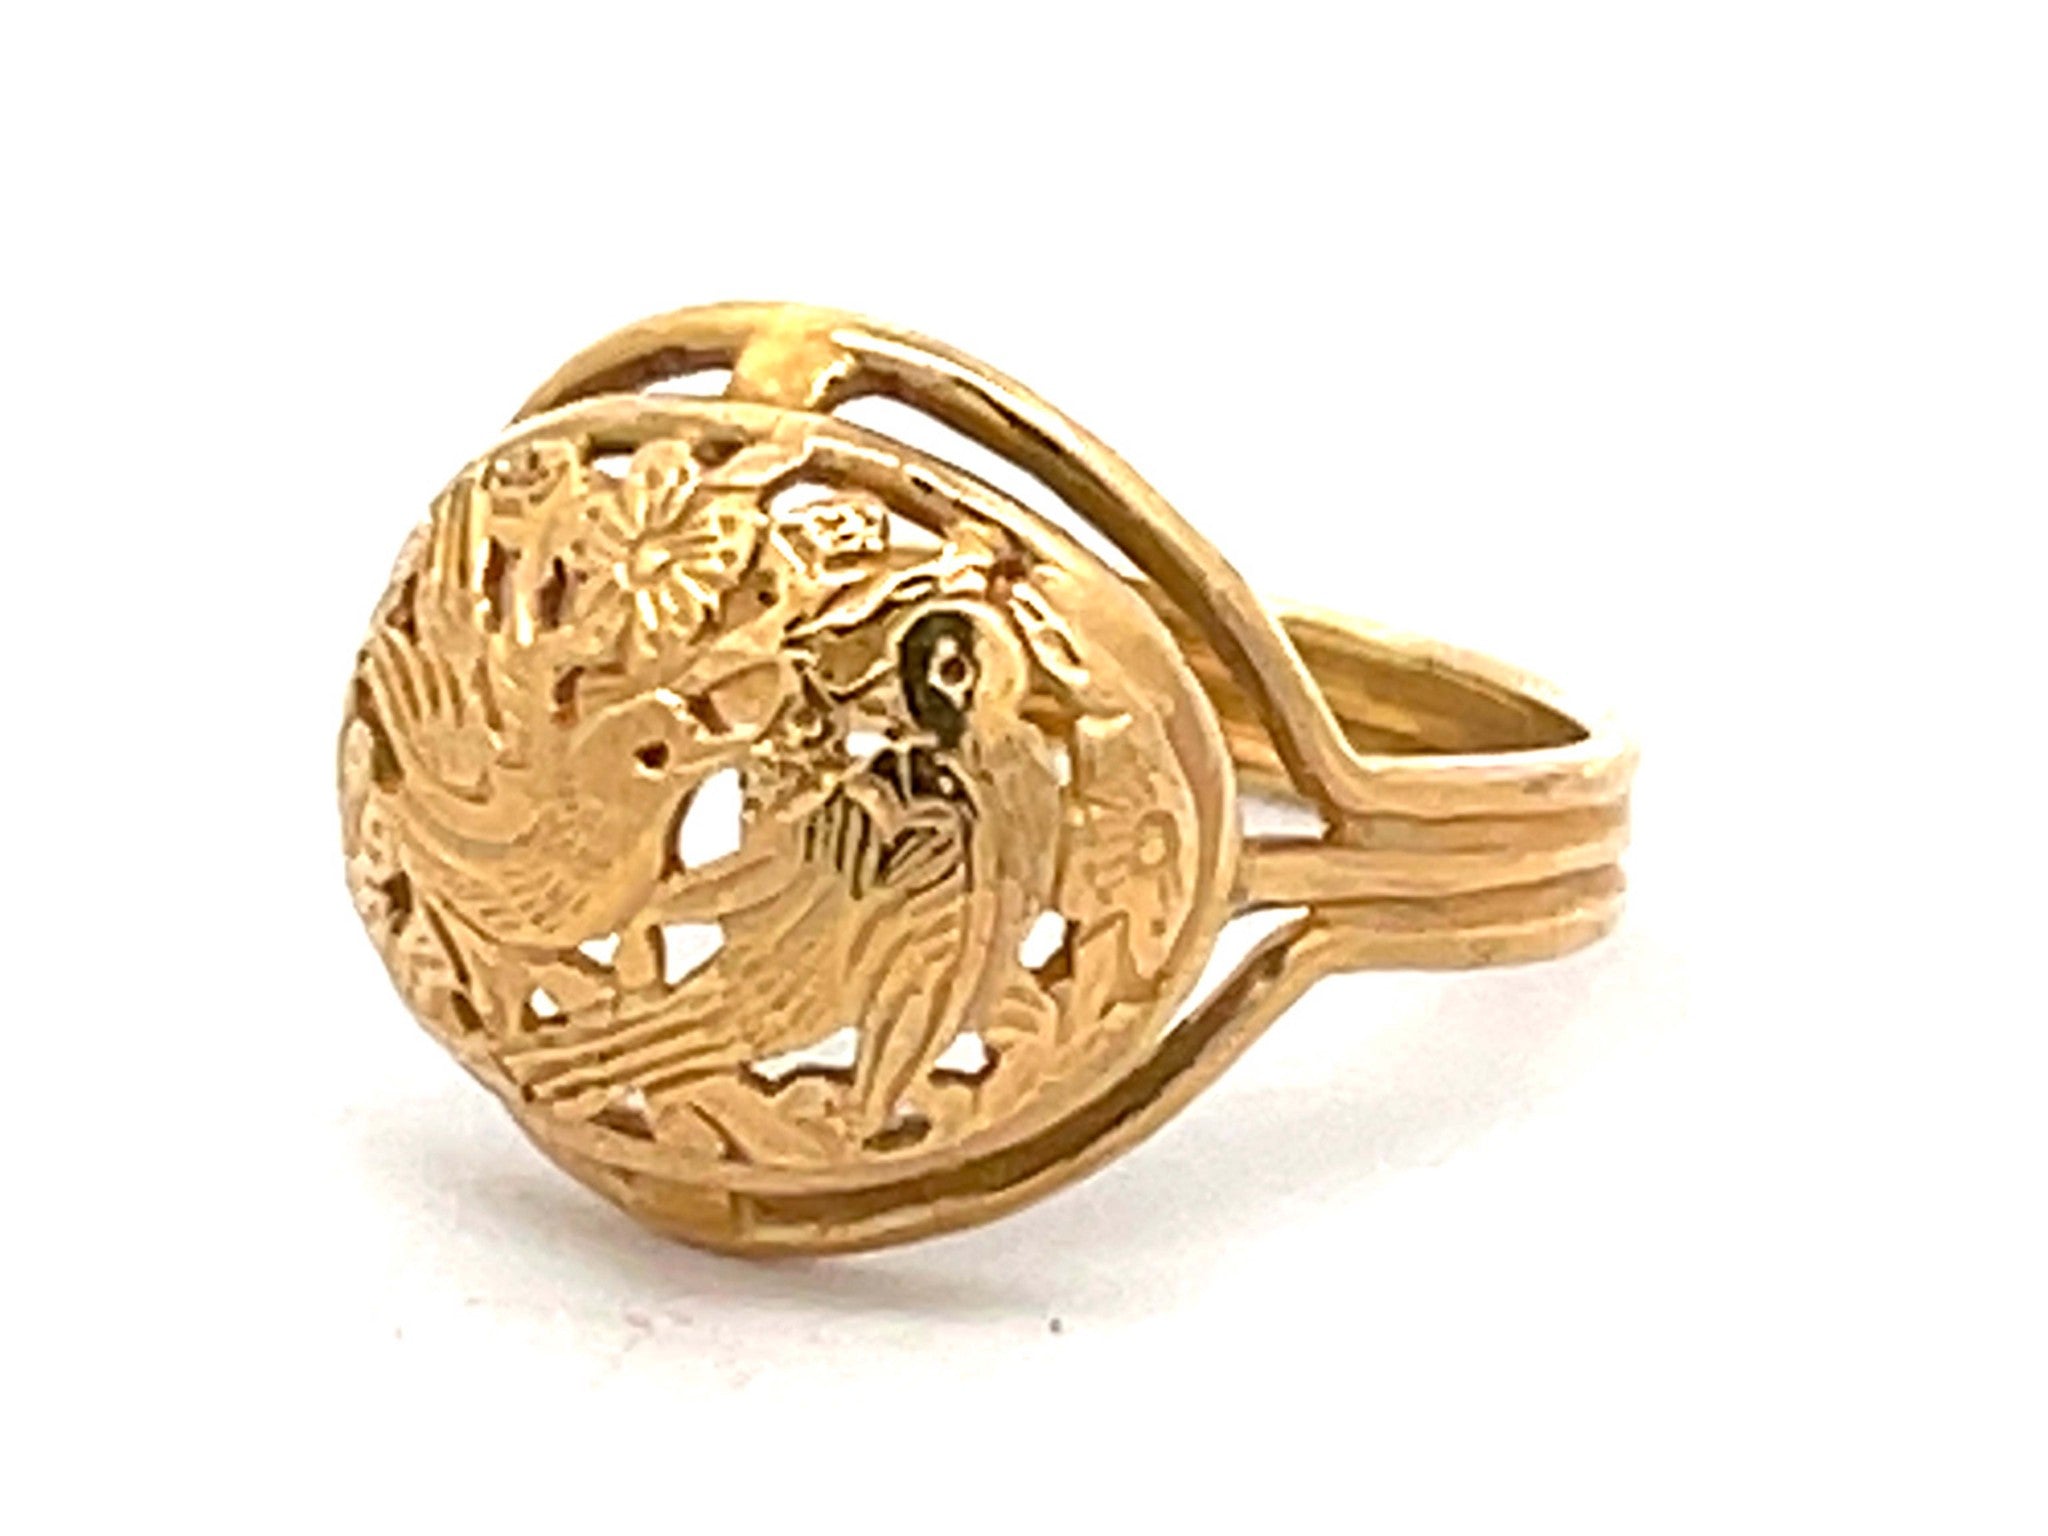 Mings Two Birds on a Plum Small Dome Ring in 14k Yellow Gold